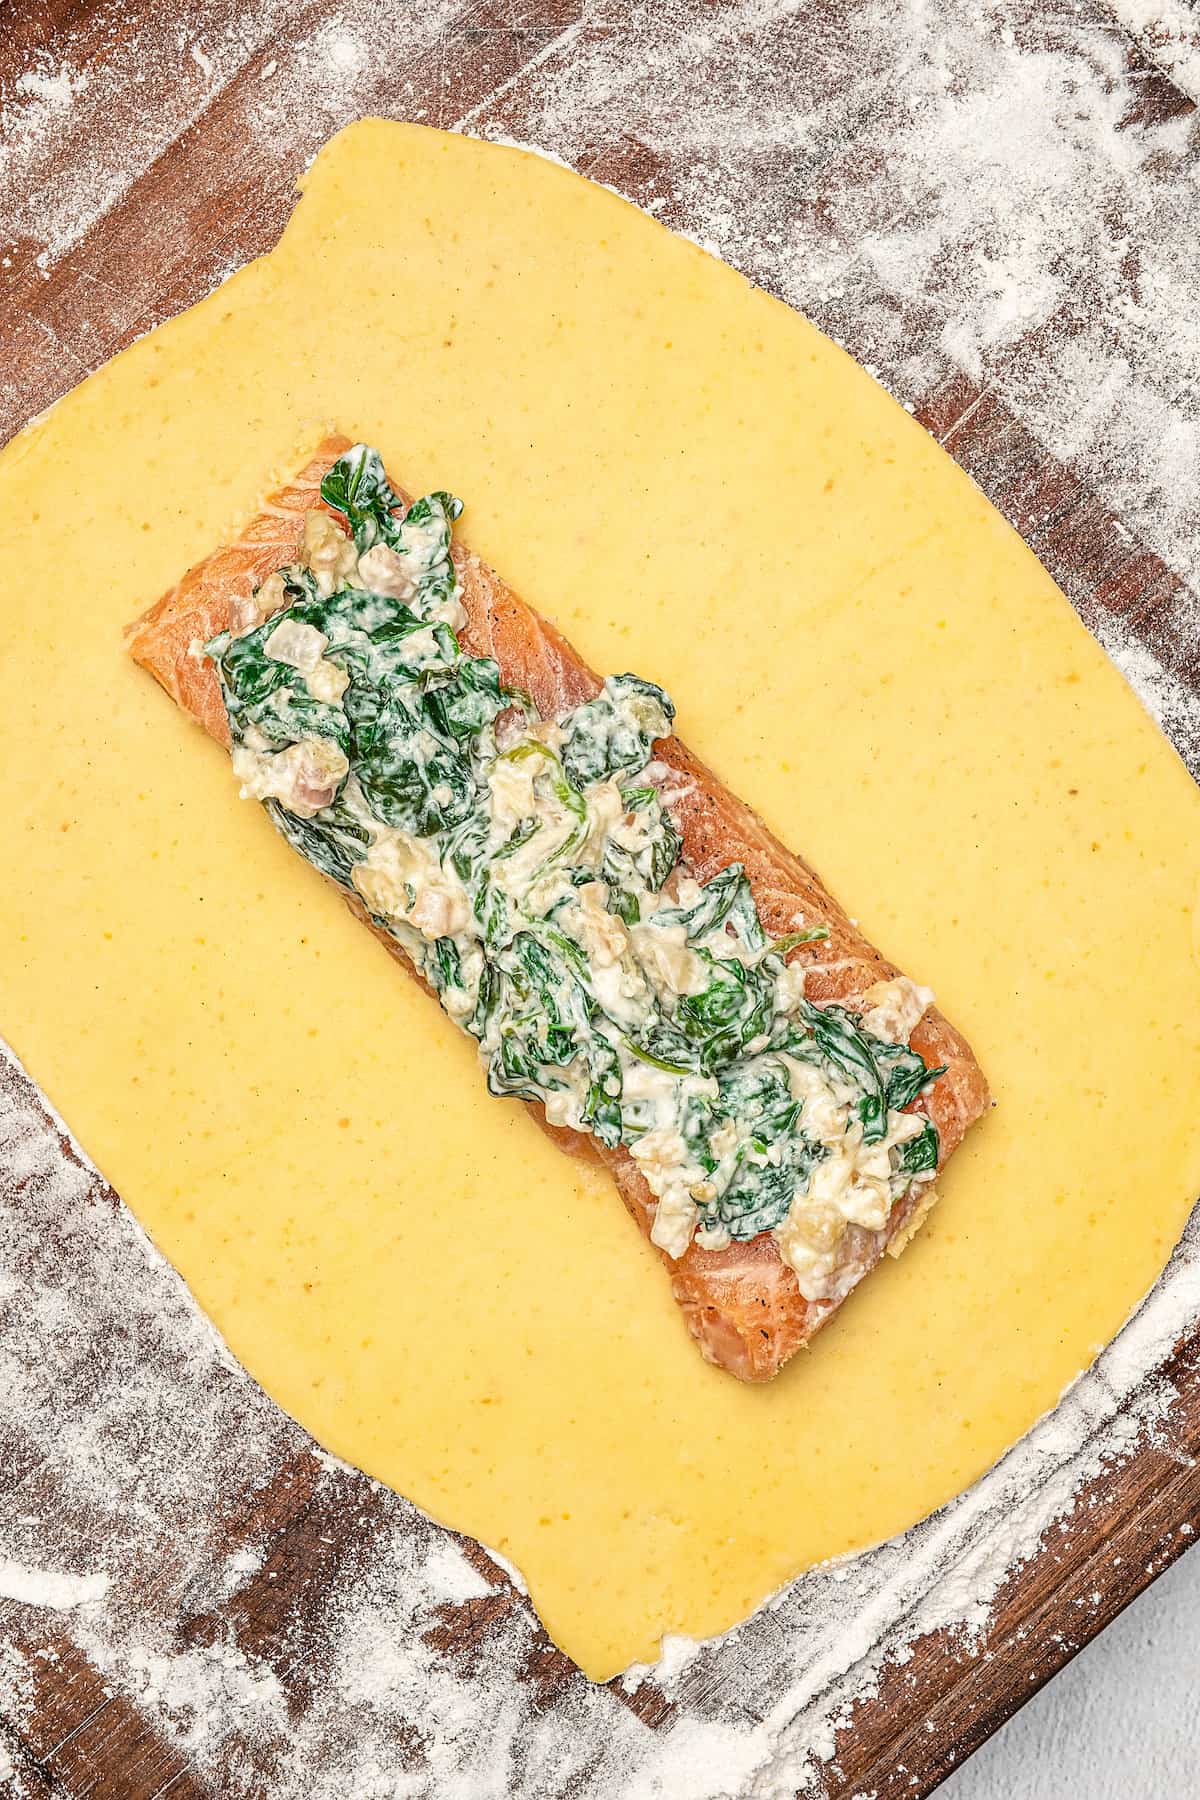 A salmon fillet topped with spinach mixture in the middle of rolled out pastry dough.